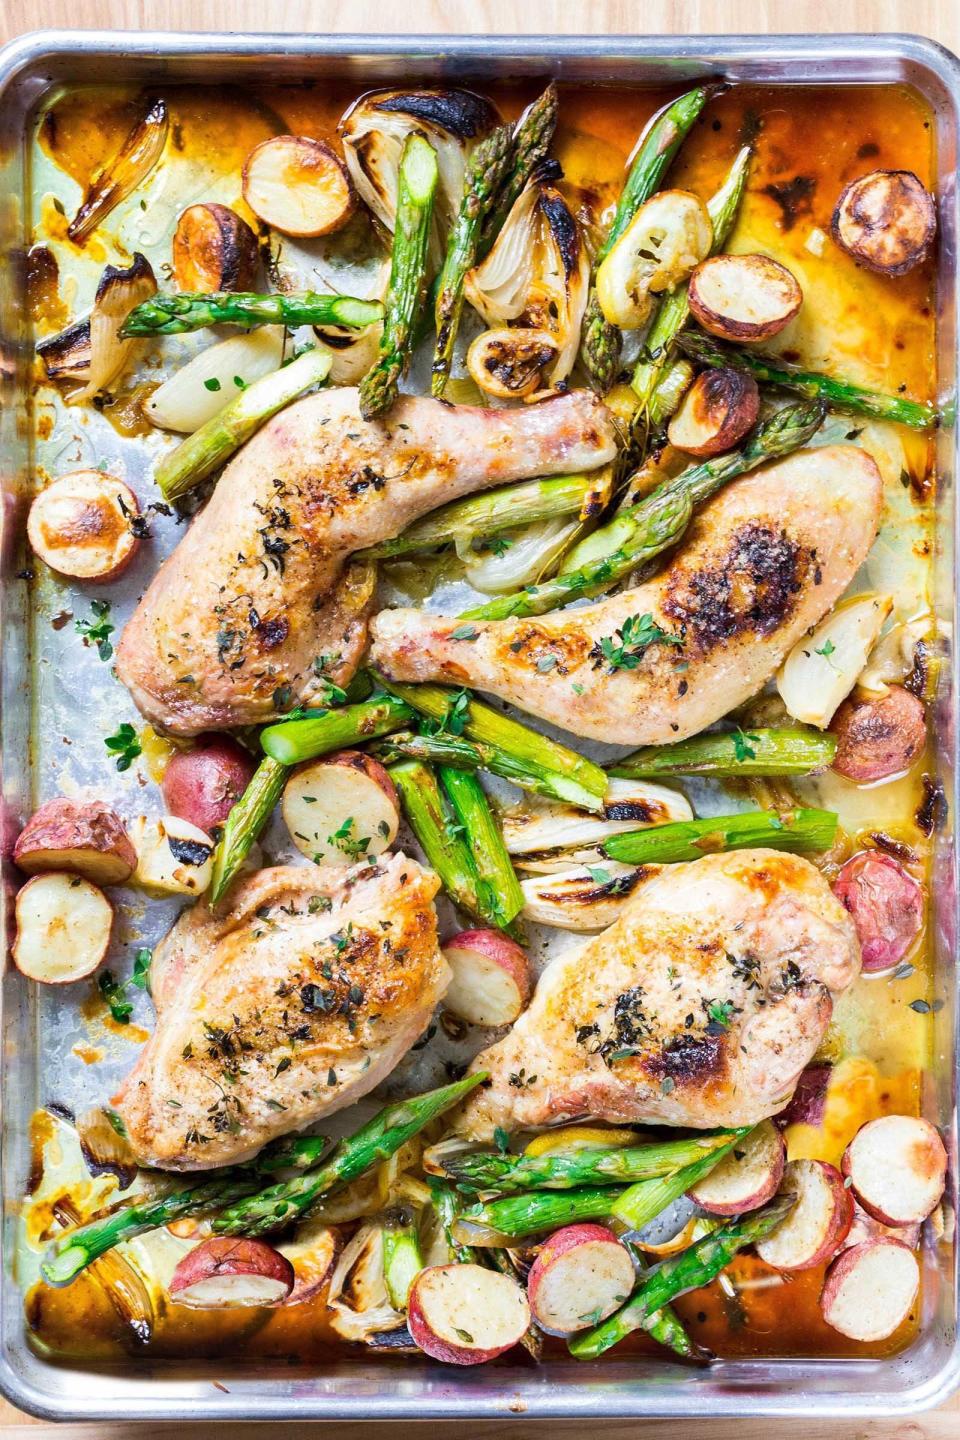 <strong>Get the <a href="https://www.simplyrecipes.com/recipes/sheet_pan_chicken_with_asparagus_and_potatoes/" target="_blank">Sheet Pan Chicken With Asparagus And Potatoes</a> recipe from Simply Recipes</strong>